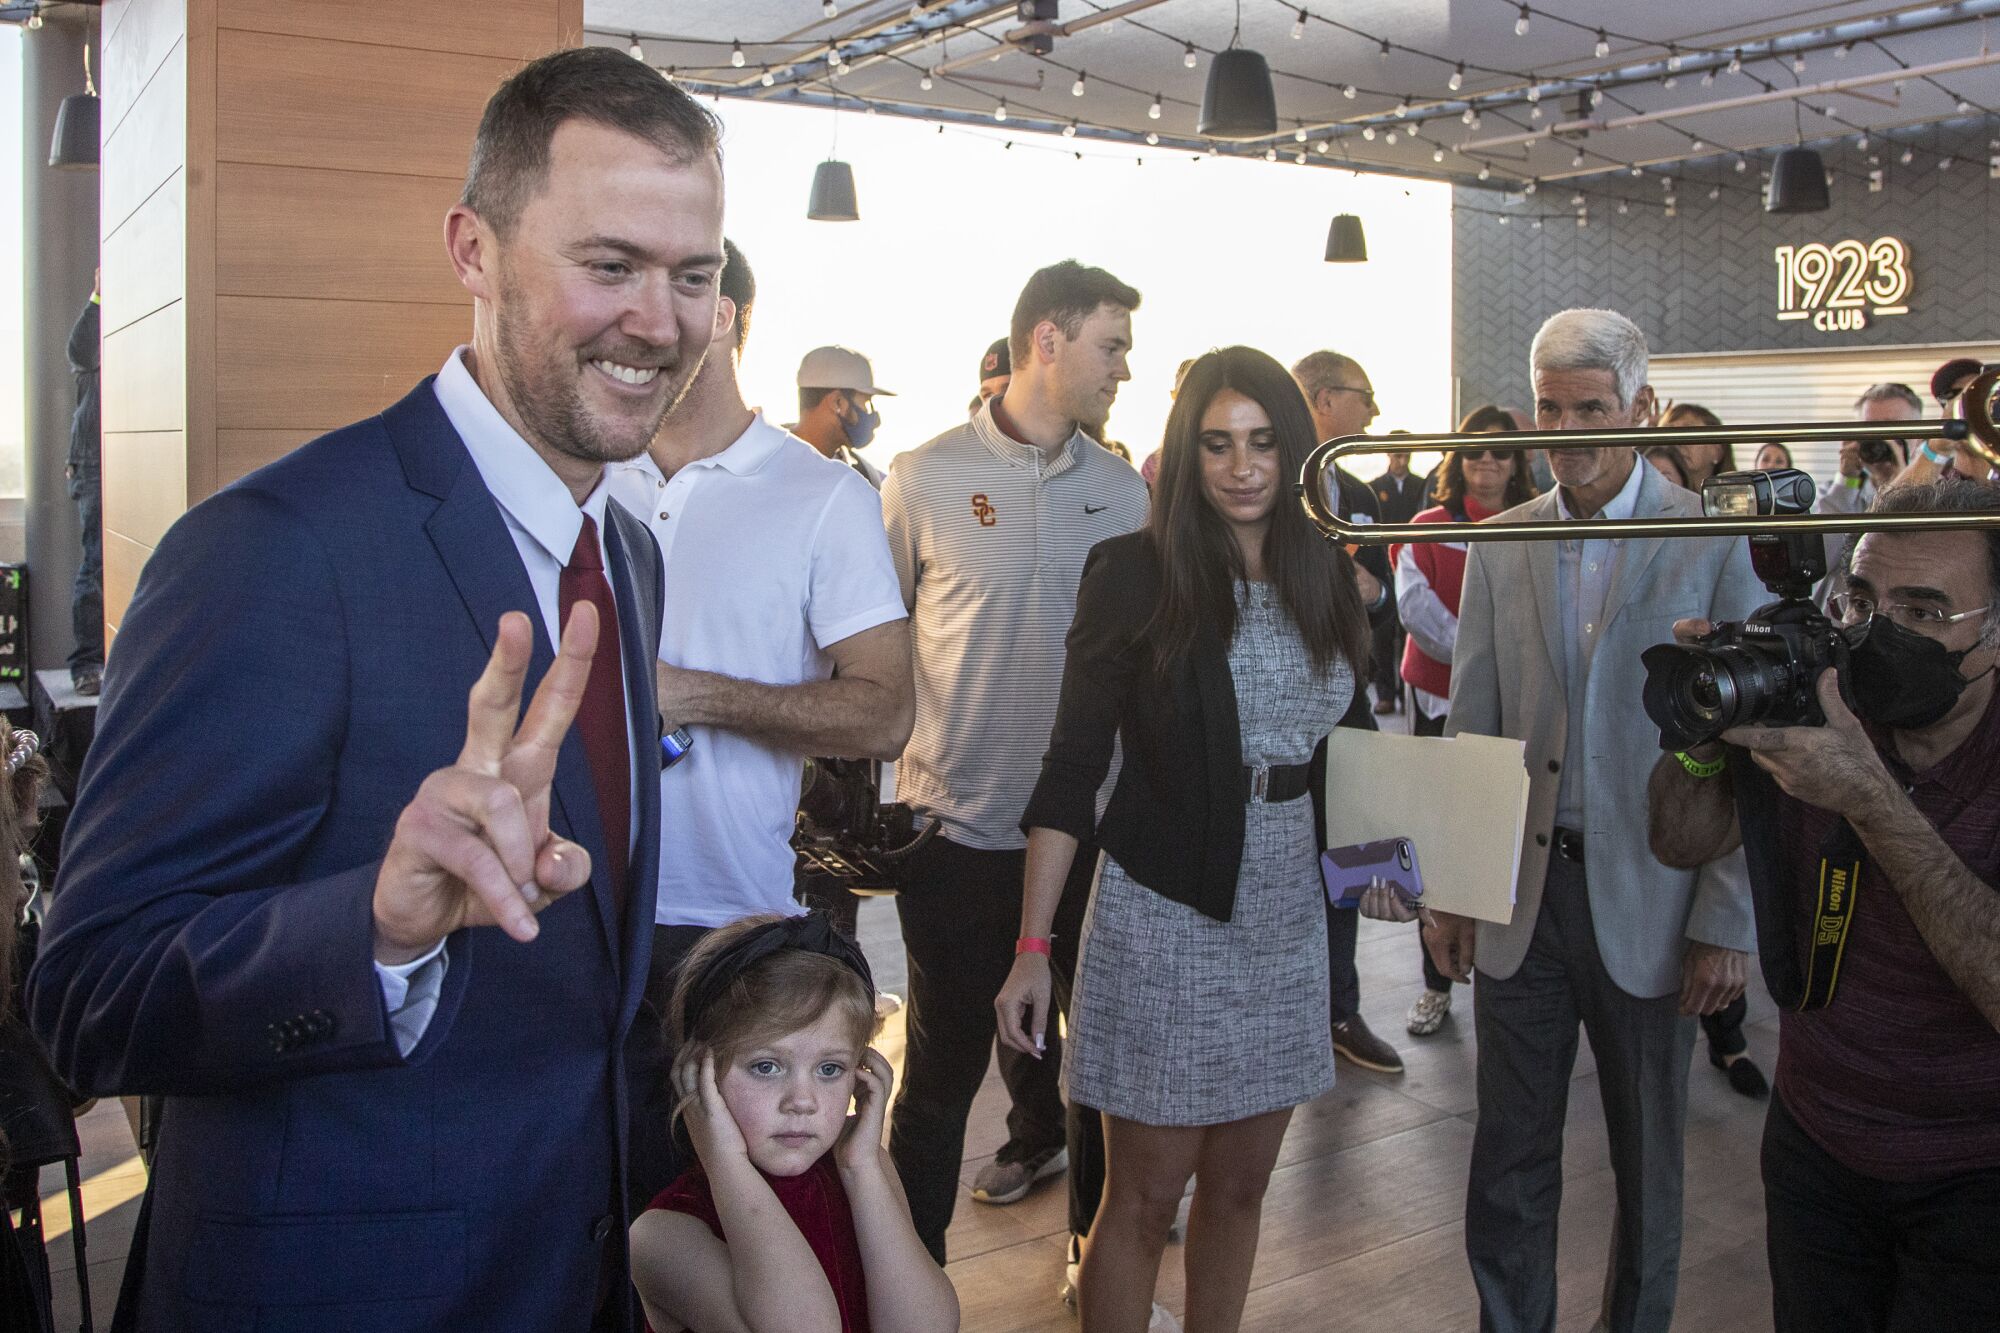  Lincoln Riley flashes Trojan sign  